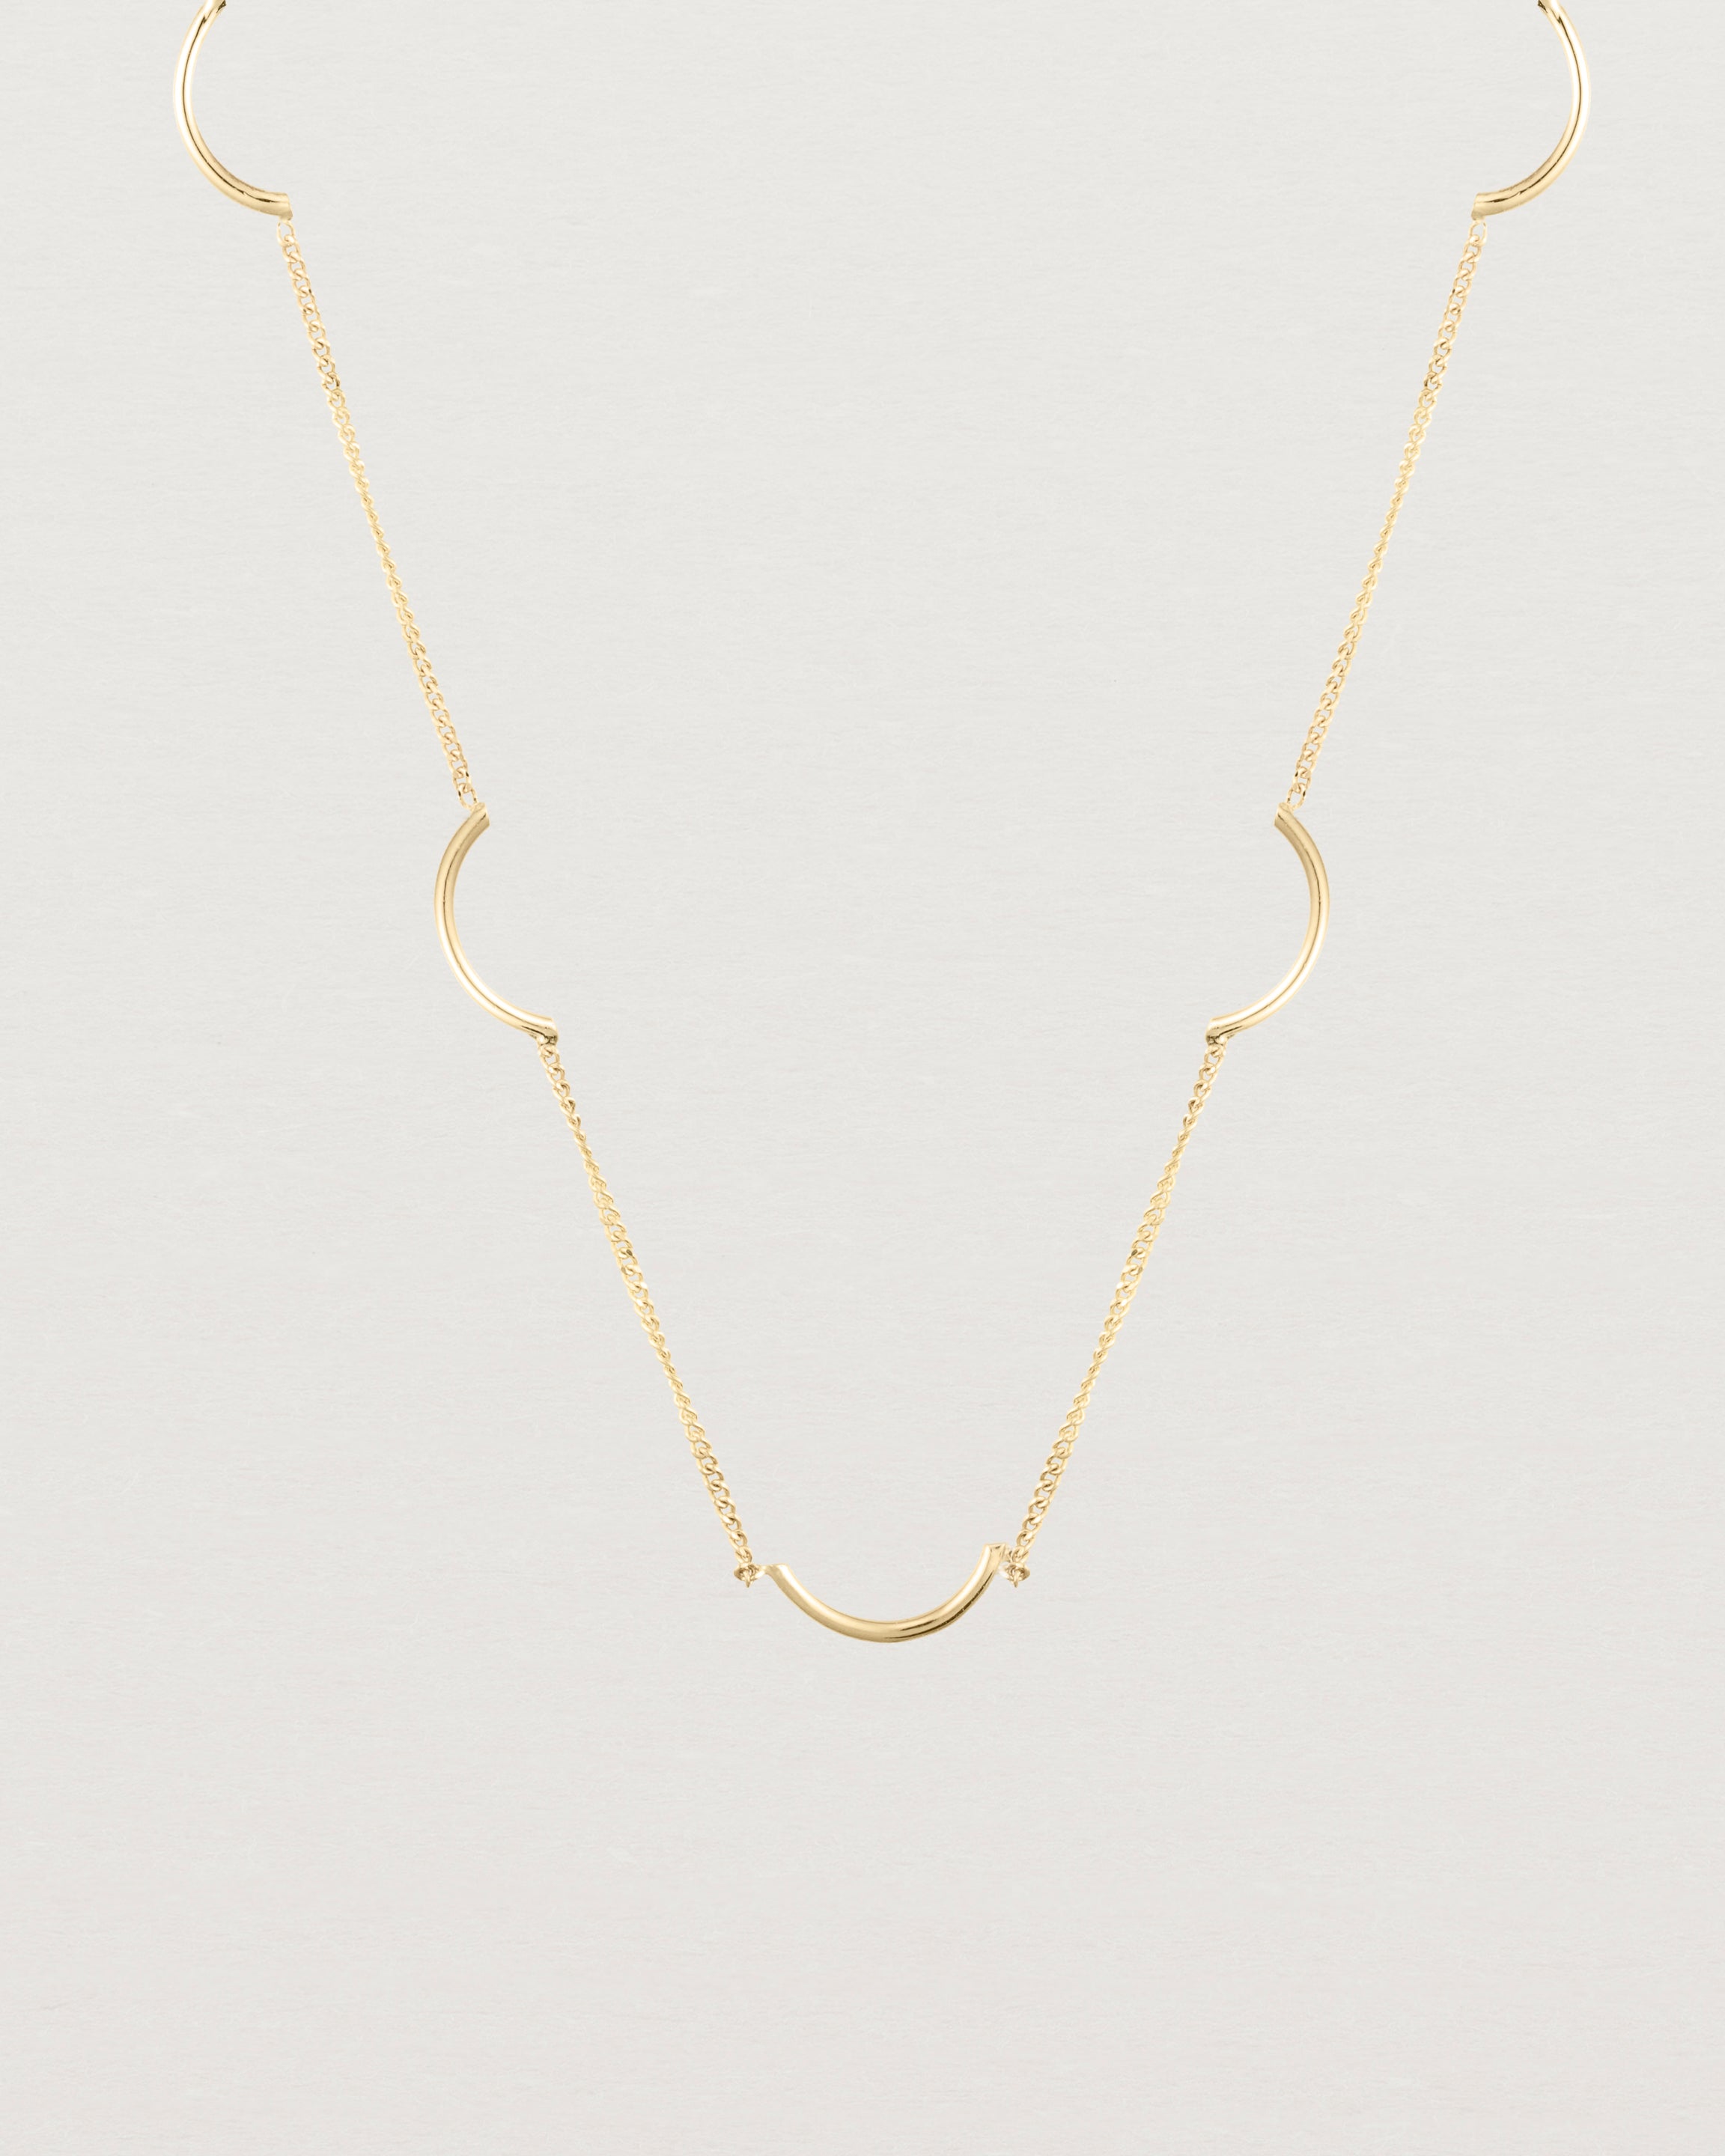 Close up of the Lai Chain Necklace in yellow gold.